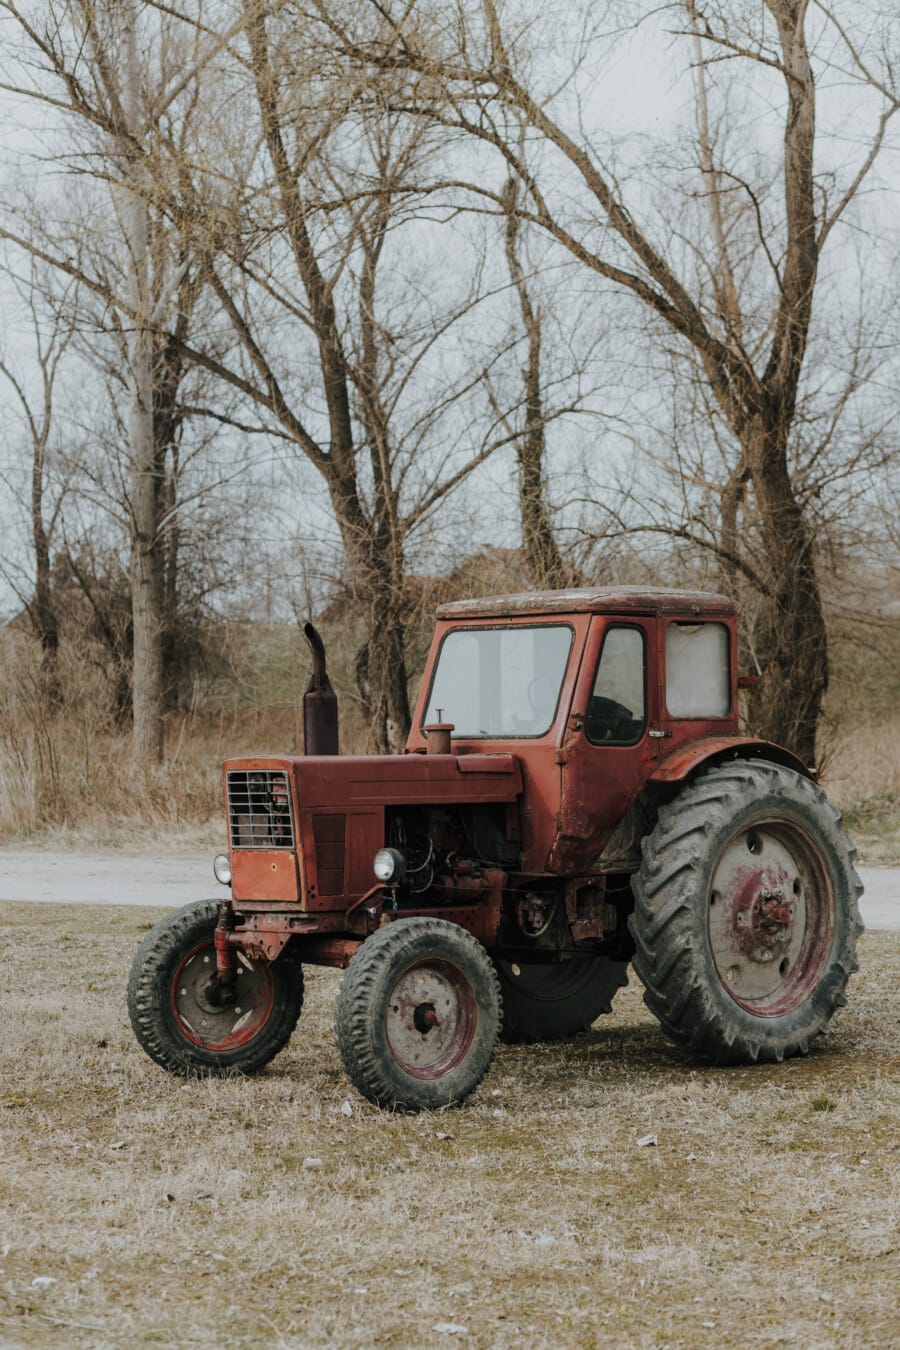 tractor, rust, old, rural, agriculture, vehicle, machine, machinery, farm, nature